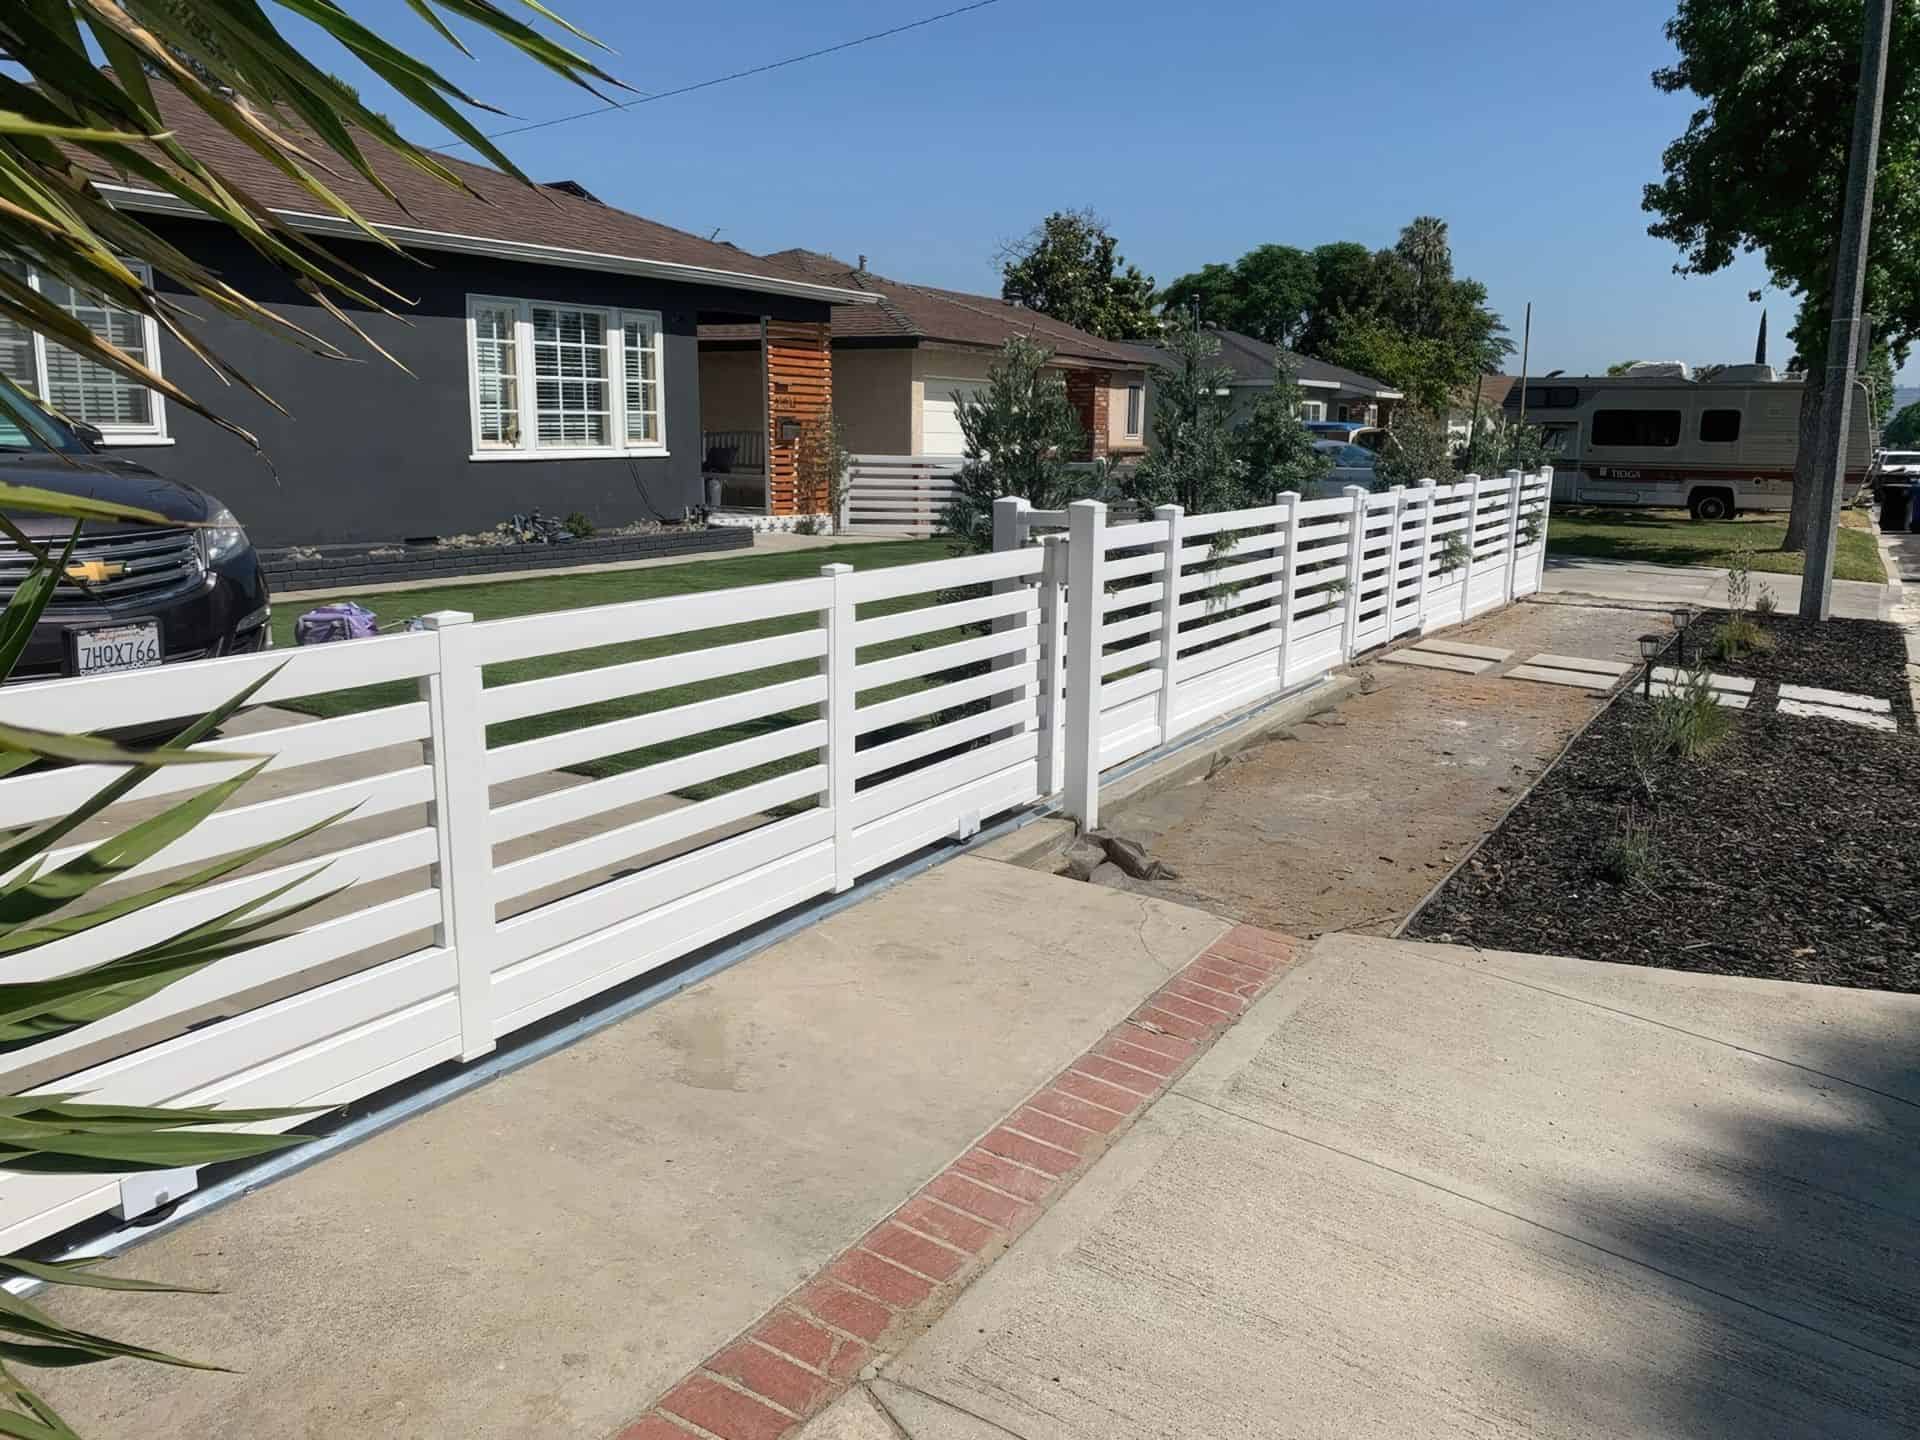 Vinyl rolling gate leading into the concrete driveway of ranch style suburban home with front lawn and trees in the back.